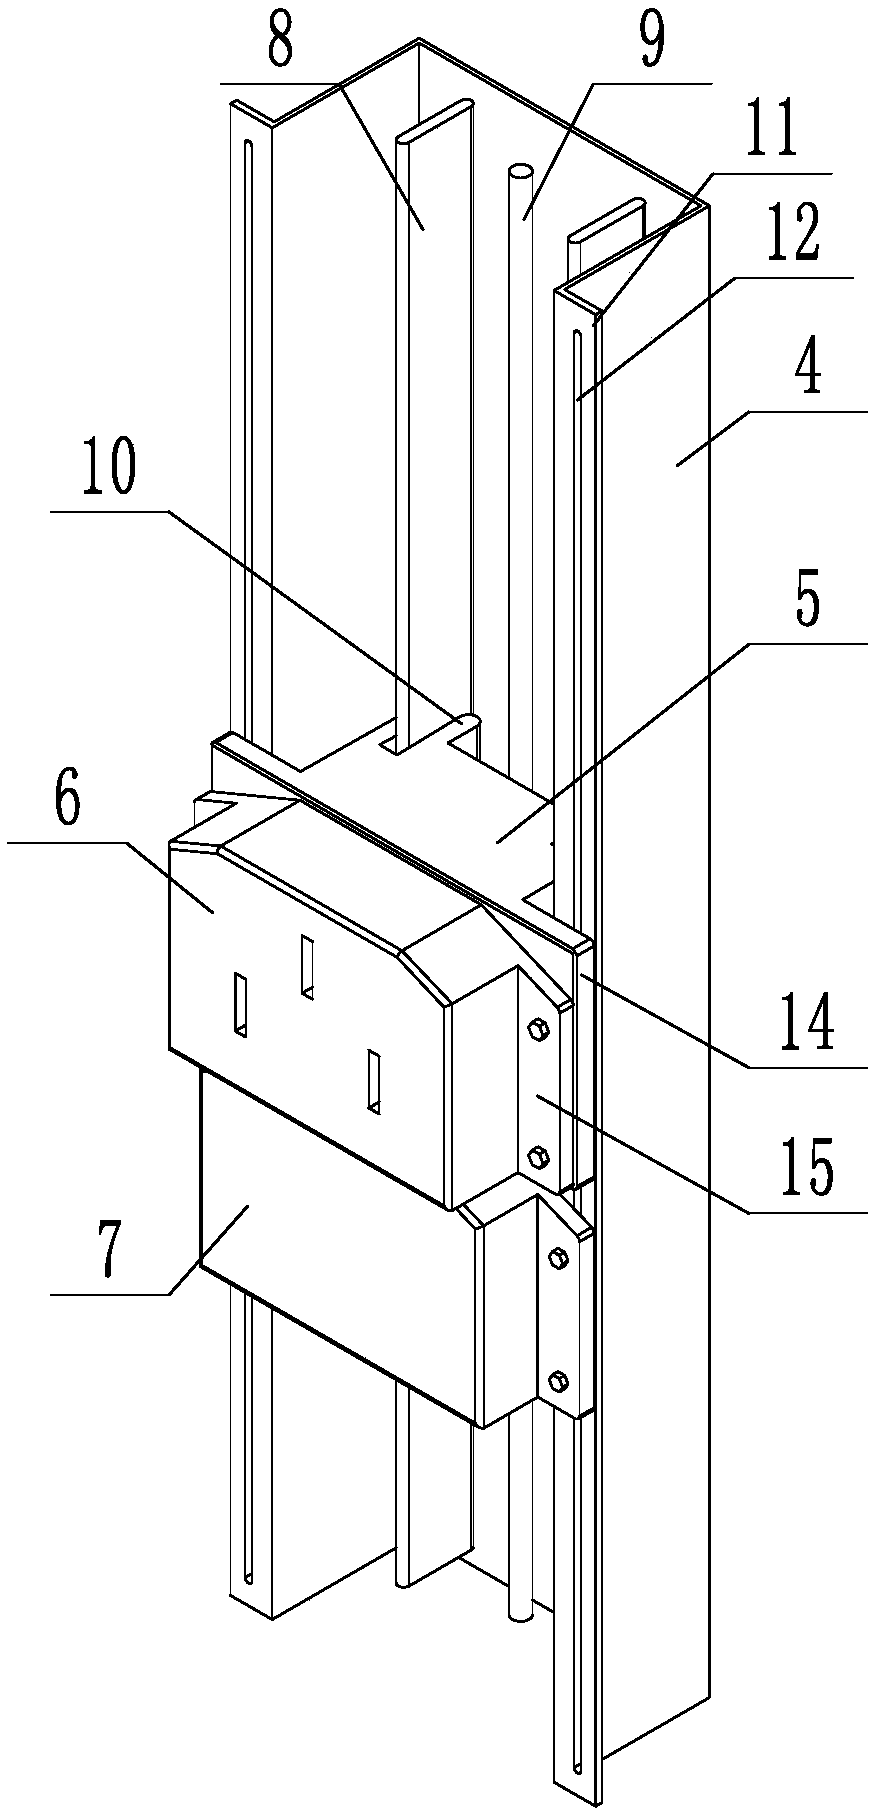 A server integrated delivery power cord tracing mechanism